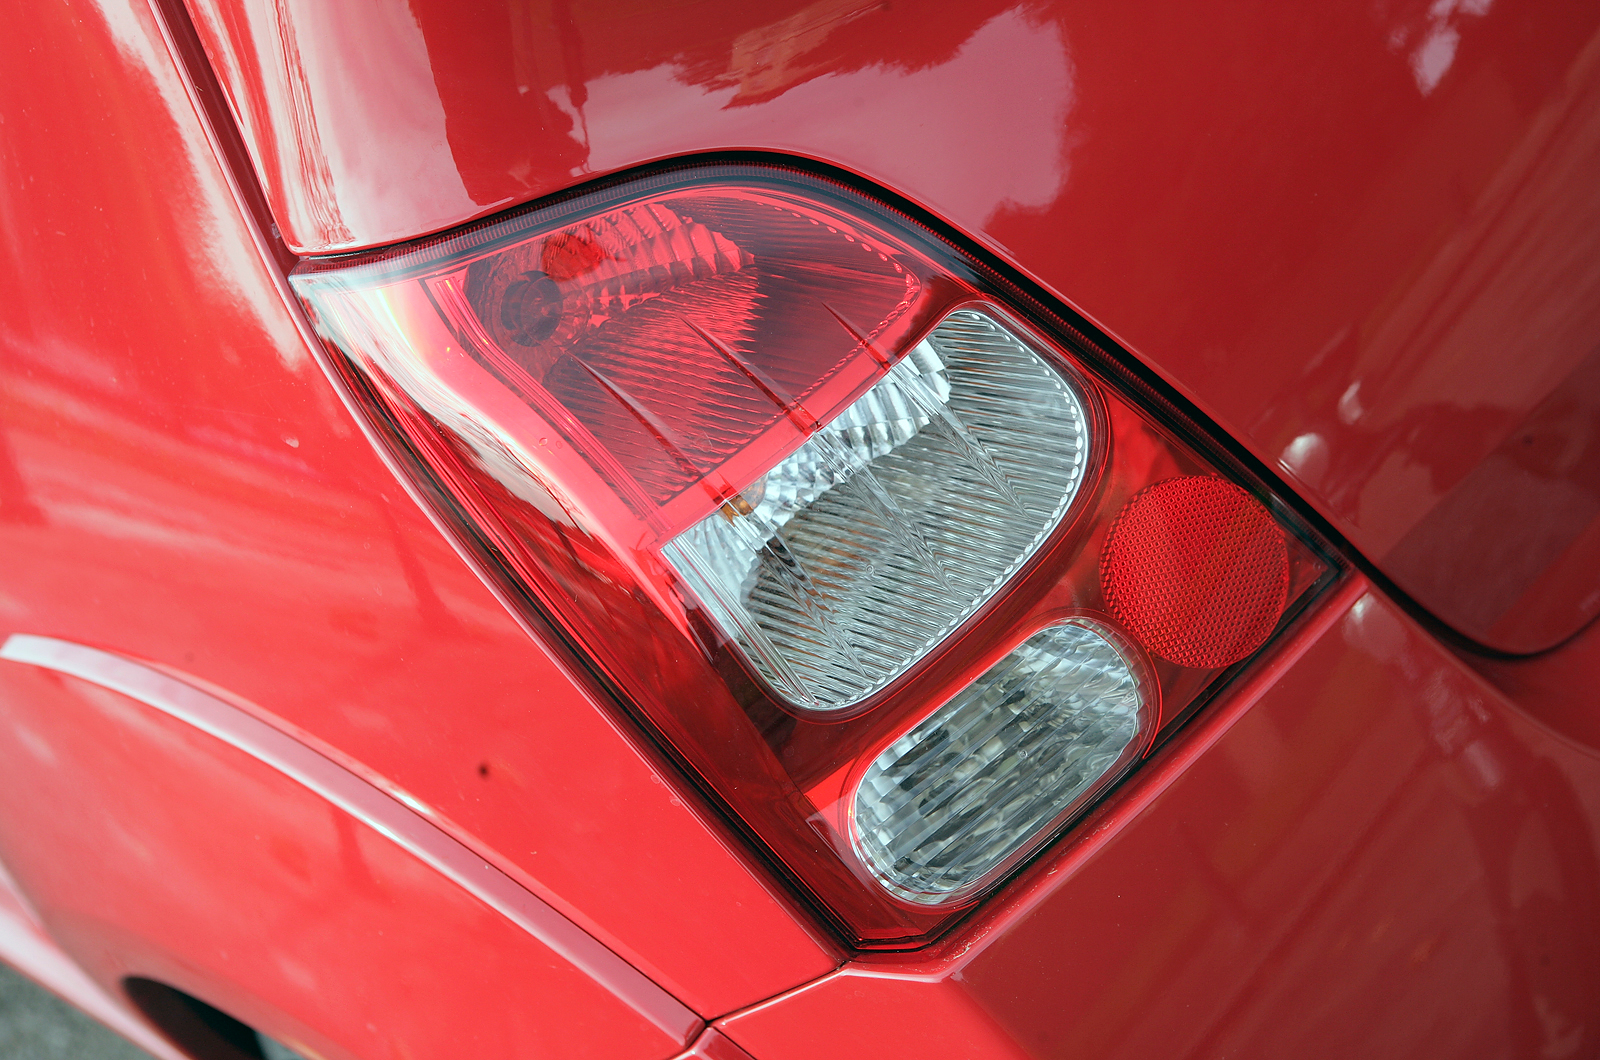 Renault Twingo RS 133 rear lights